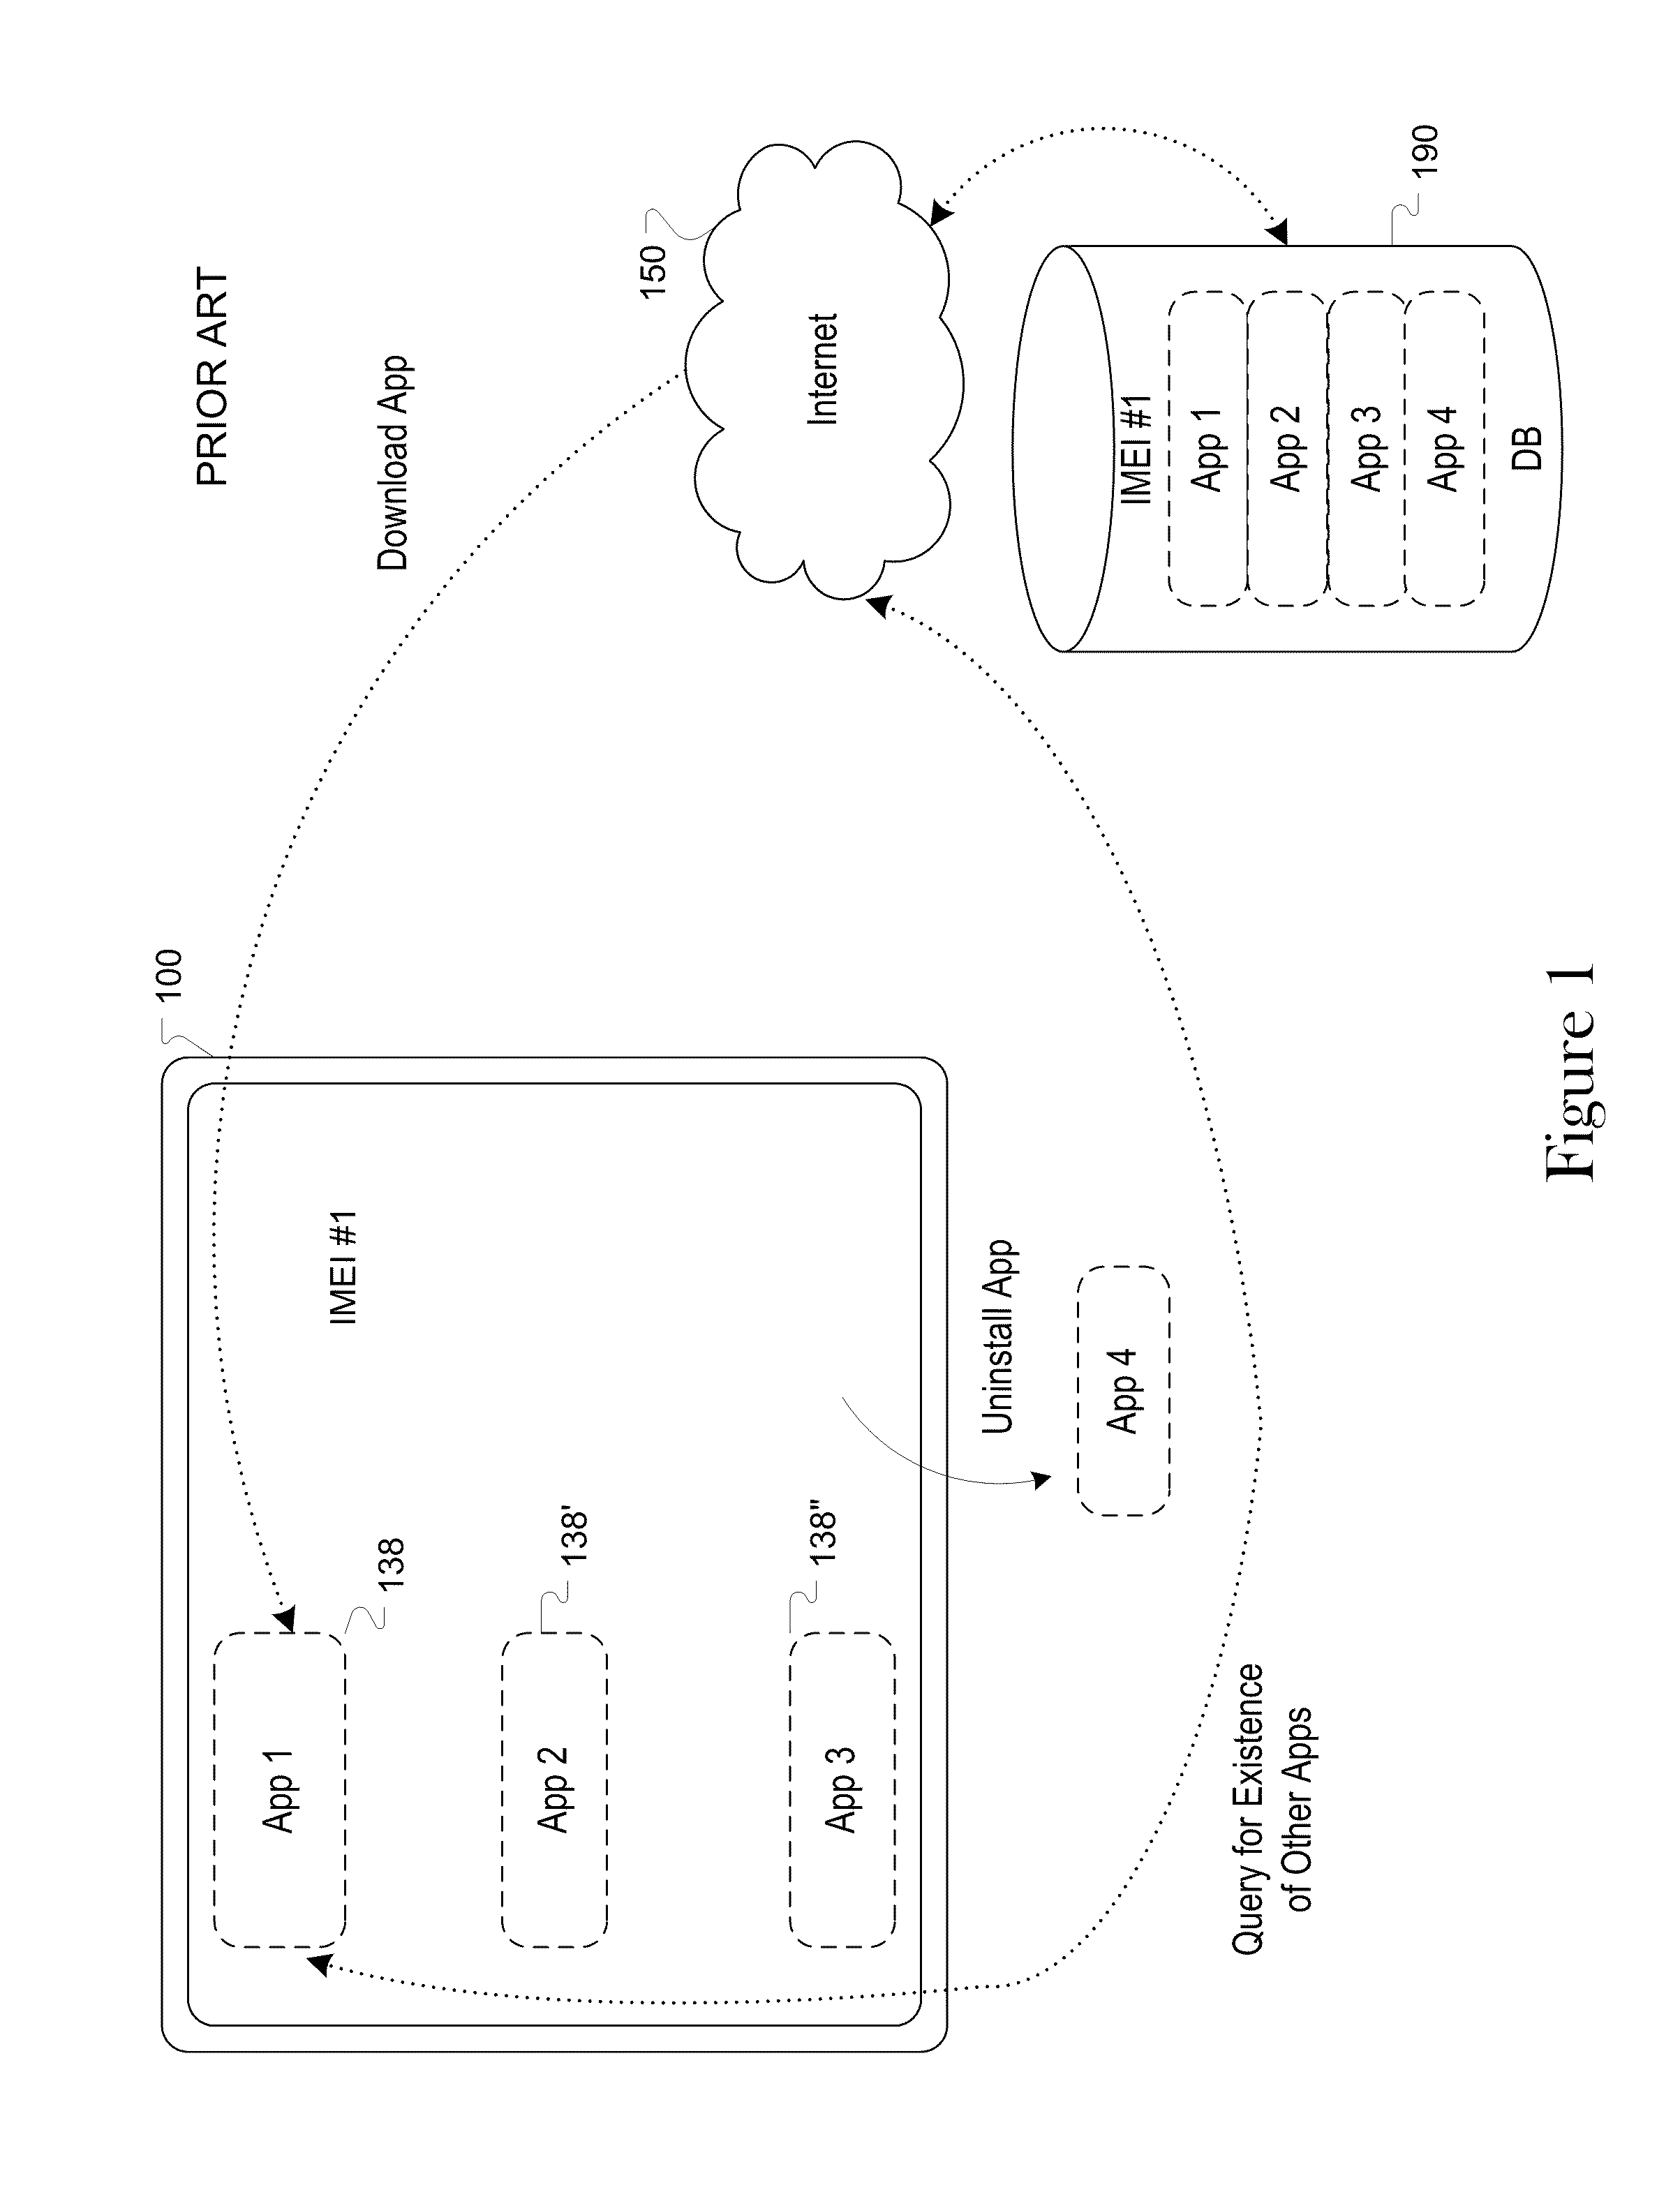 Apparatuses, systems and methods for determining installed software applications on a computing device